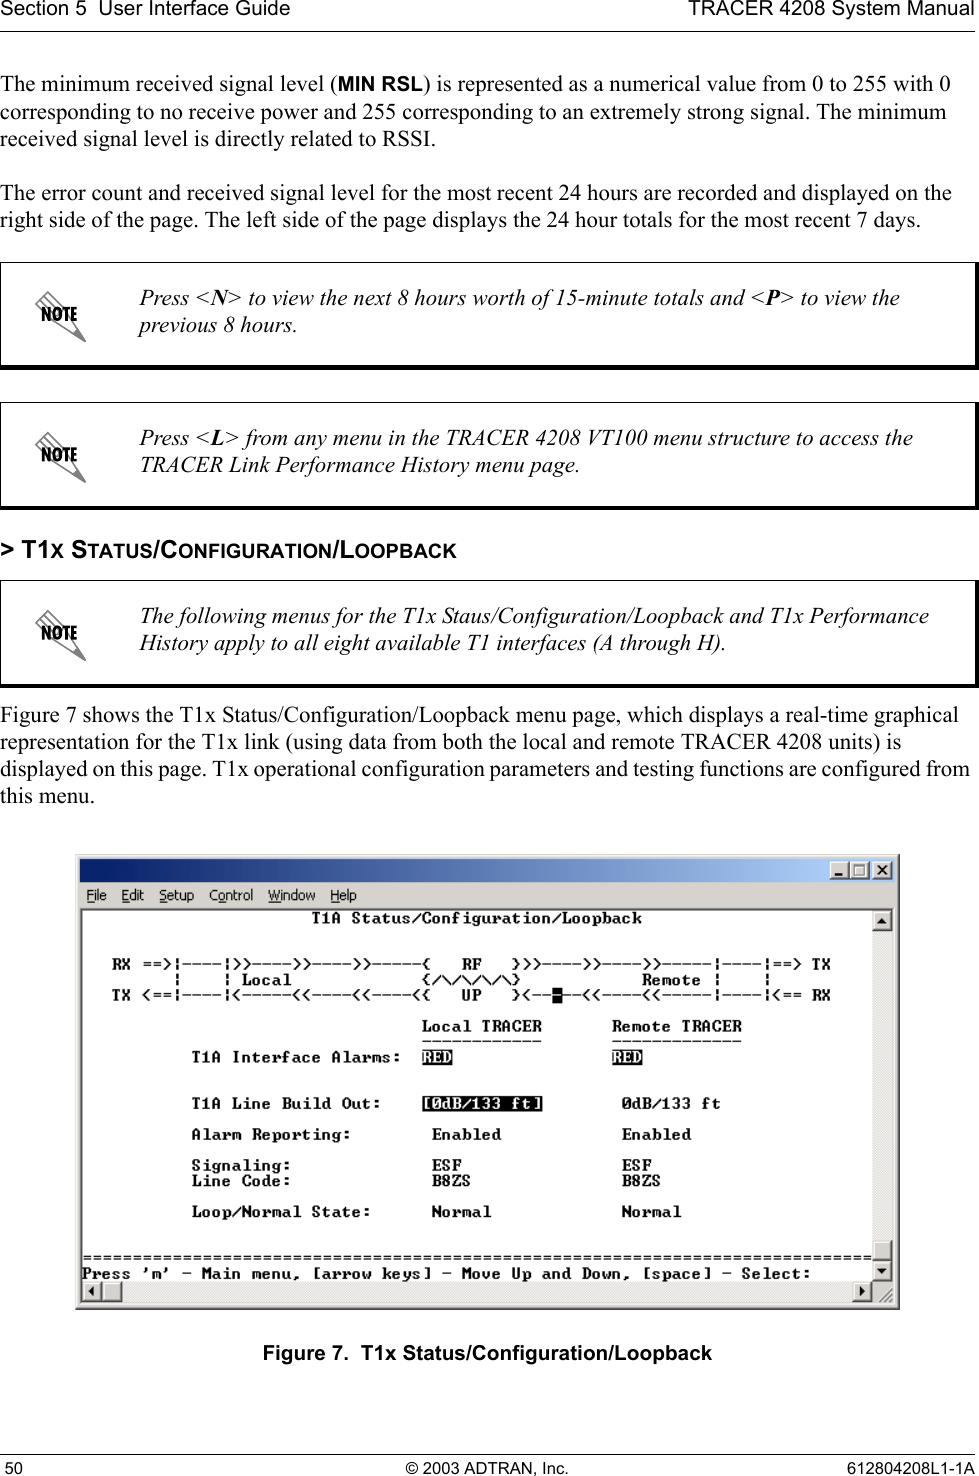 Section 5  User Interface Guide TRACER 4208 System Manual 50 © 2003 ADTRAN, Inc. 612804208L1-1AThe minimum received signal level (MIN RSL) is represented as a numerical value from 0 to 255 with 0 corresponding to no receive power and 255 corresponding to an extremely strong signal. The minimum received signal level is directly related to RSSI.The error count and received signal level for the most recent 24 hours are recorded and displayed on the right side of the page. The left side of the page displays the 24 hour totals for the most recent 7 days. &gt; T1X STATUS/CONFIGURATION/LOOPBACKFigure 7 shows the T1x Status/Configuration/Loopback menu page, which displays a real-time graphical representation for the T1x link (using data from both the local and remote TRACER 4208 units) is displayed on this page. T1x operational configuration parameters and testing functions are configured from this menu.Figure 7.  T1x Status/Configuration/LoopbackPress &lt;N&gt; to view the next 8 hours worth of 15-minute totals and &lt;P&gt; to view the previous 8 hours.Press &lt;L&gt; from any menu in the TRACER 4208 VT100 menu structure to access the TRACER Link Performance History menu page.The following menus for the T1x Staus/Configuration/Loopback and T1x Performance History apply to all eight available T1 interfaces (A through H).